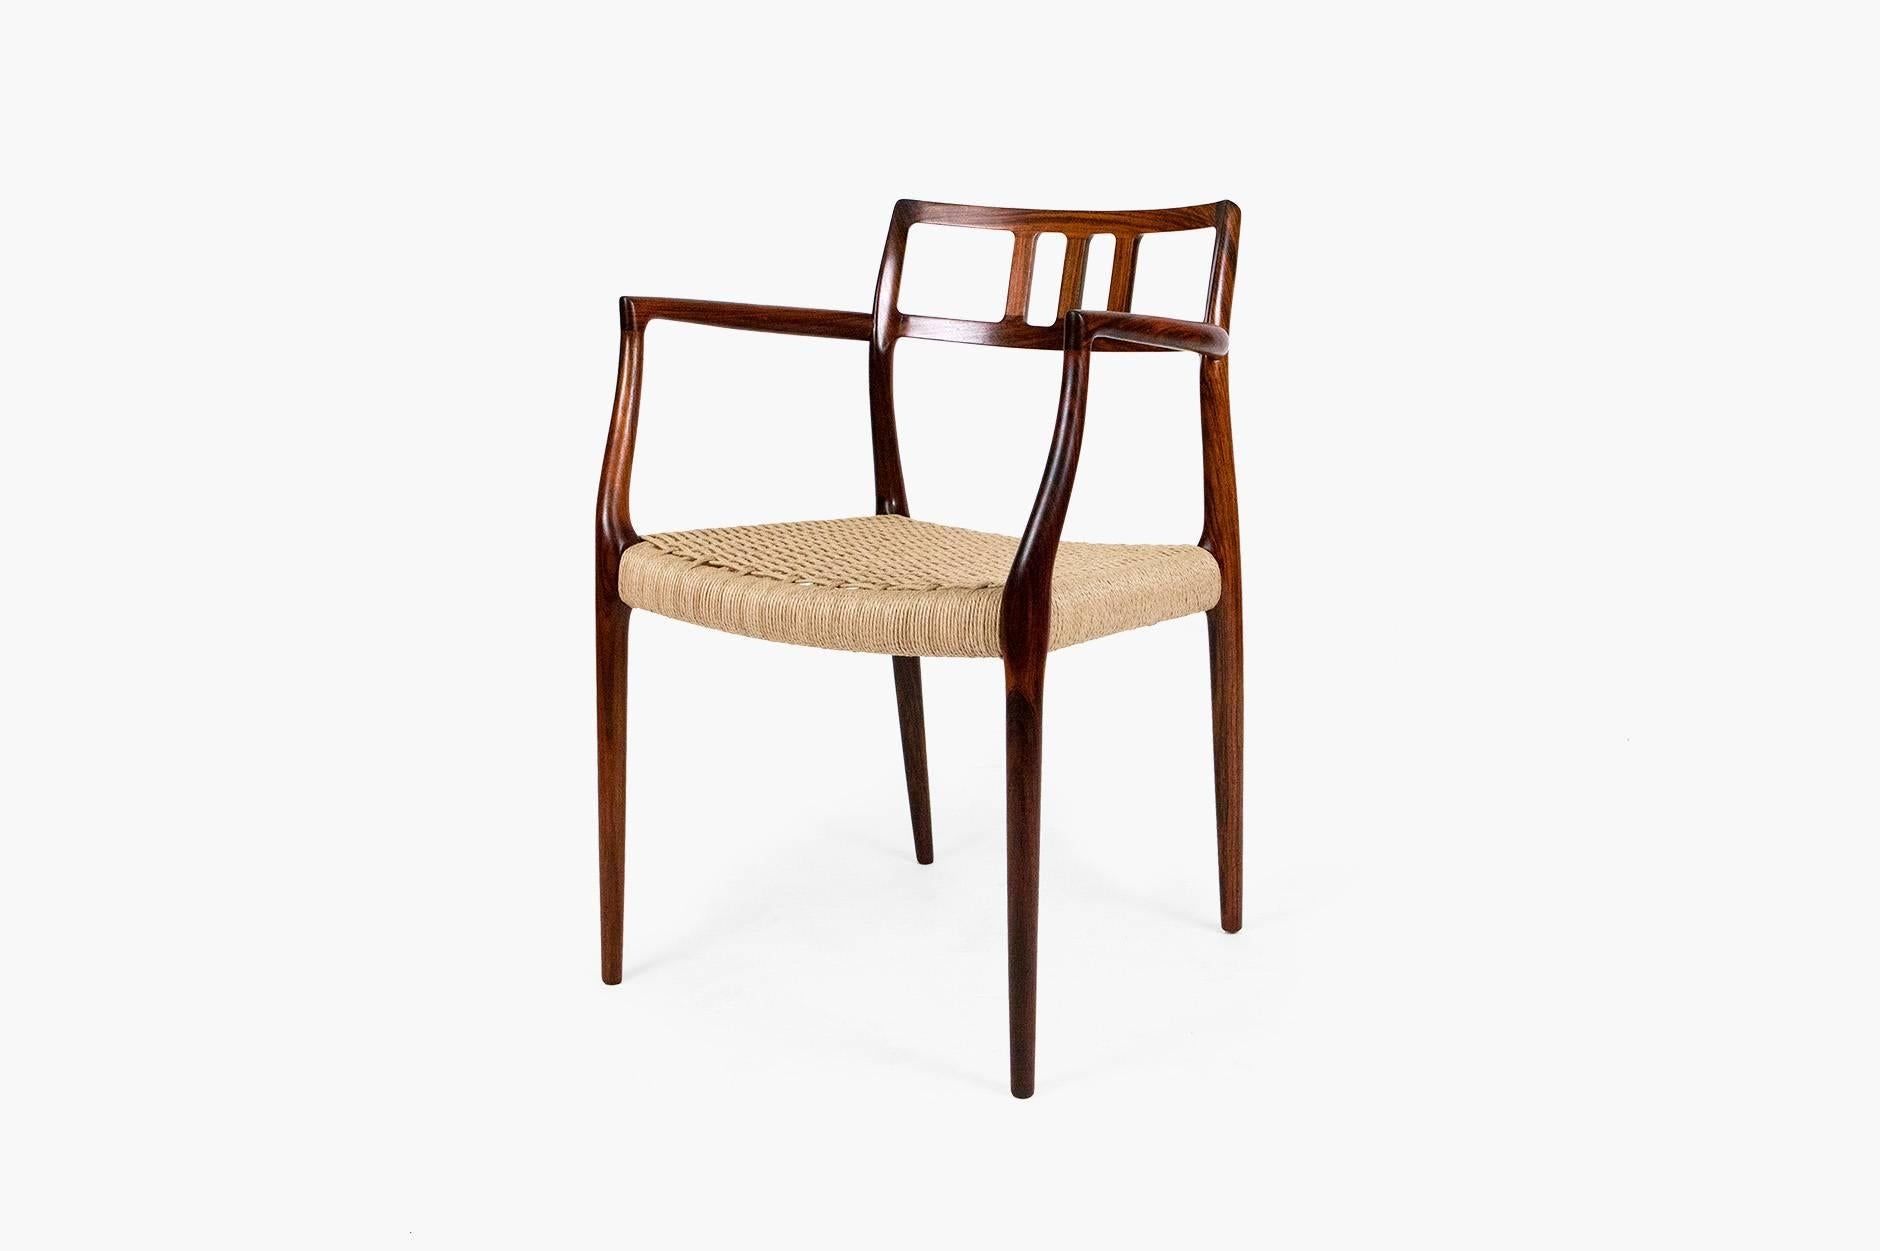 Solid Brazilian rosewood armchair designed by Niels Moller for JL Moller Mobelfabrik, Denmark, 1966. Model No. 64. Woven Danish papercord seat. Rarely seen and highly sought after model.
   